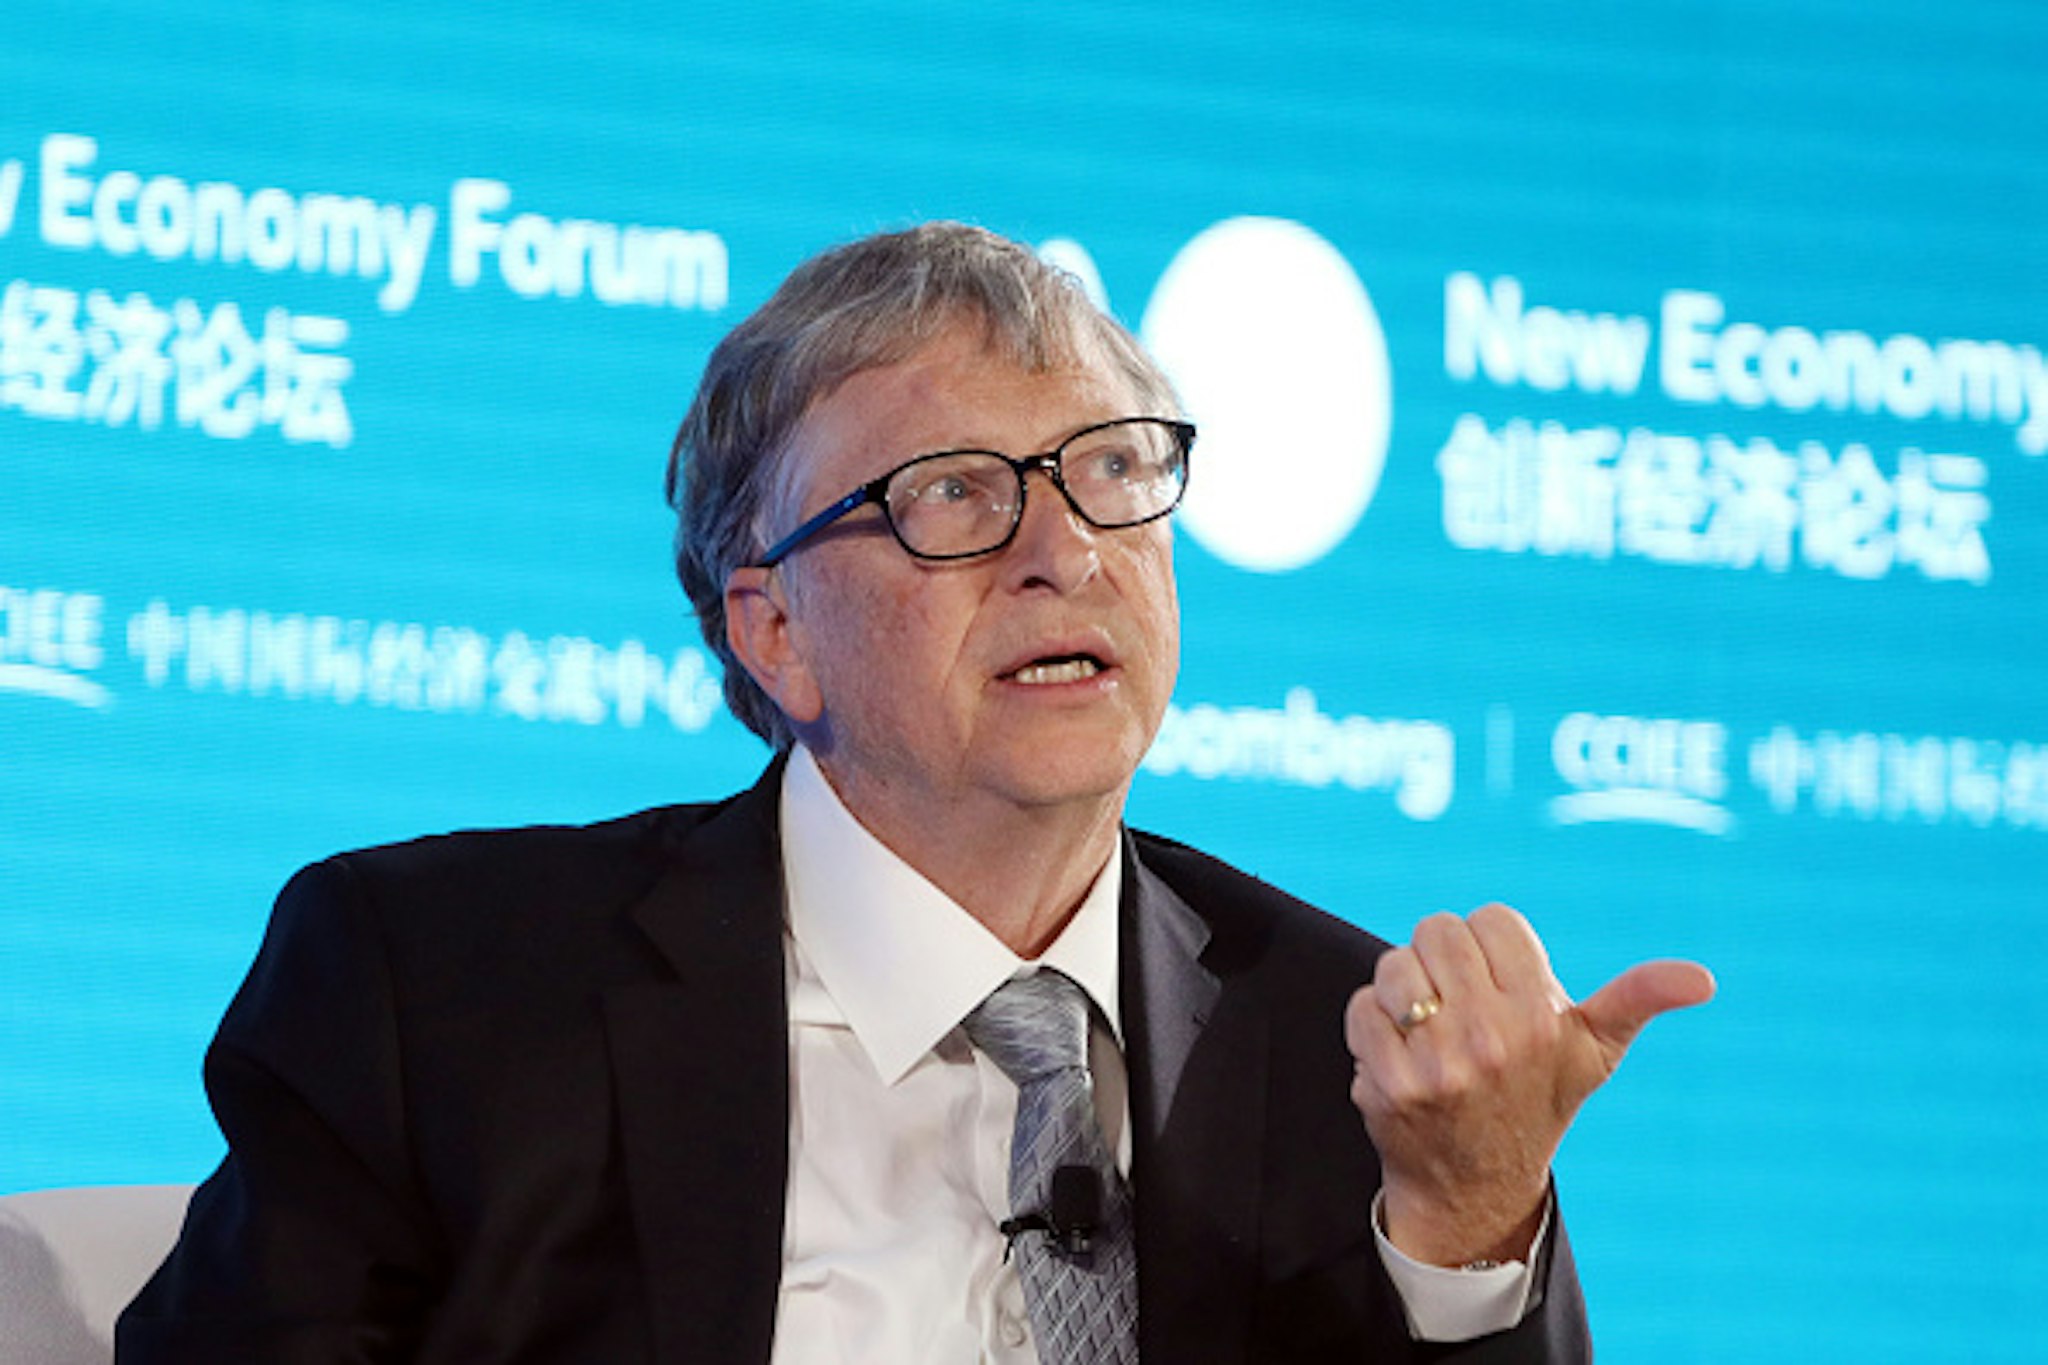 Bill Gates, co-chair of the Bill and Melinda Gates Foundation, speaks during the Bloomberg New Economy Forum in Beijing, China, on Thursday, Nov. 21, 2019. The New Economy Forum, organized by Bloomberg Media Group, a division of Bloomberg LP, aims to bring together leaders from public and private sectors to find solutions to the world's greatest challenges.